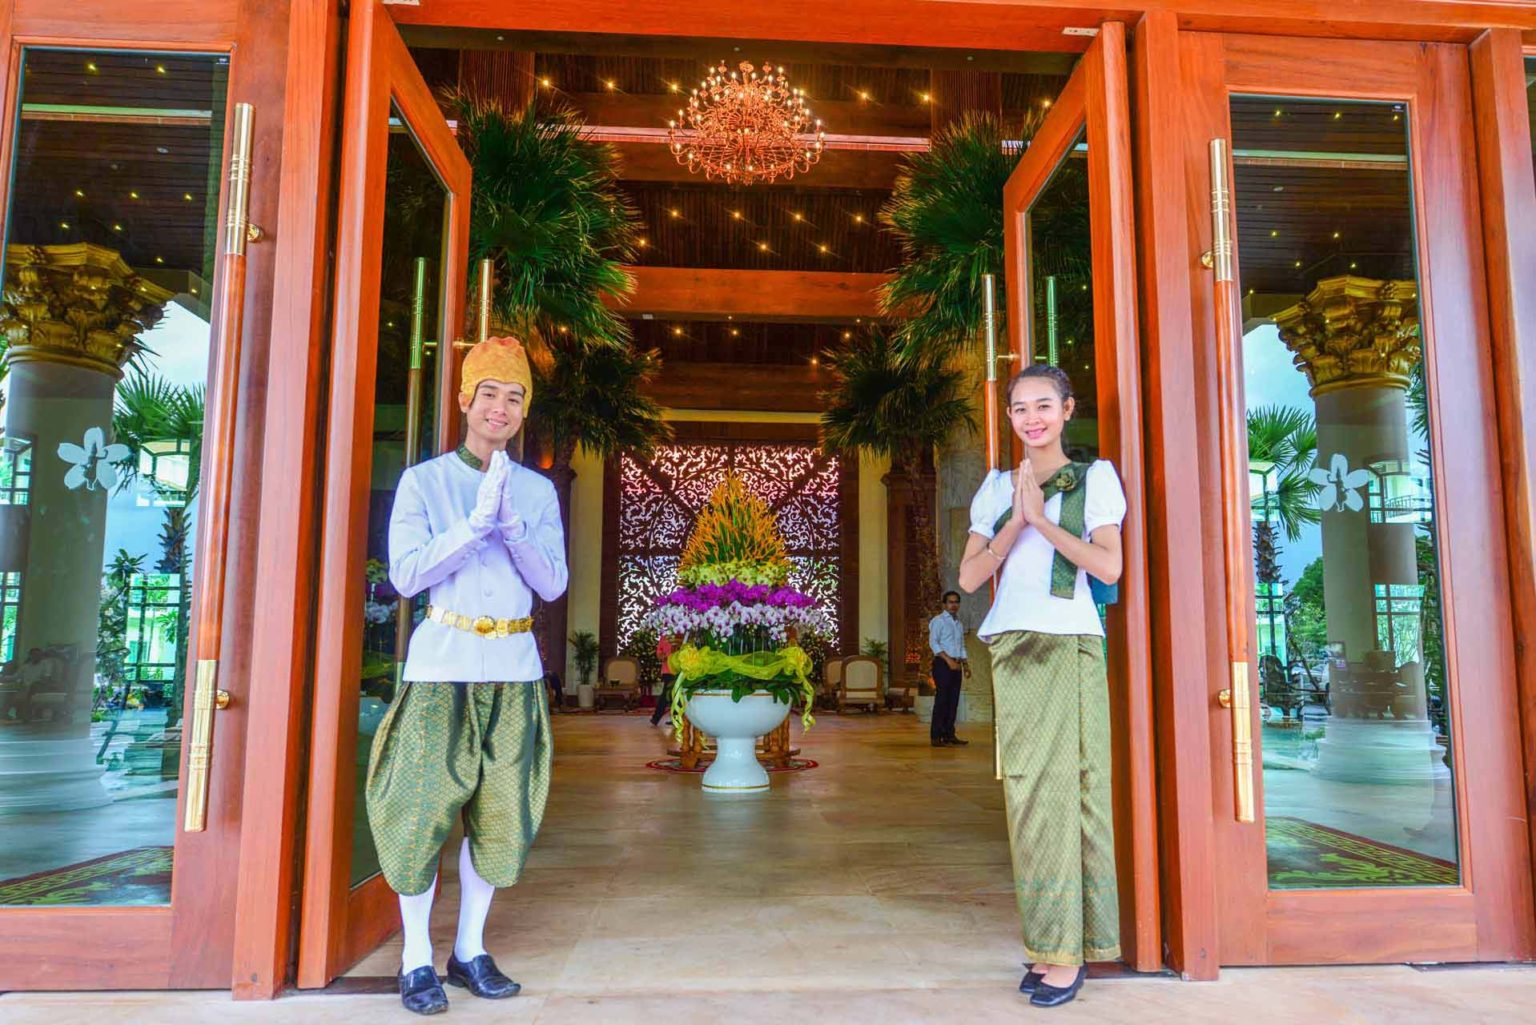 Staff greeters in traditional clothing at the main entrance of the Sokha Siem Reap Resort